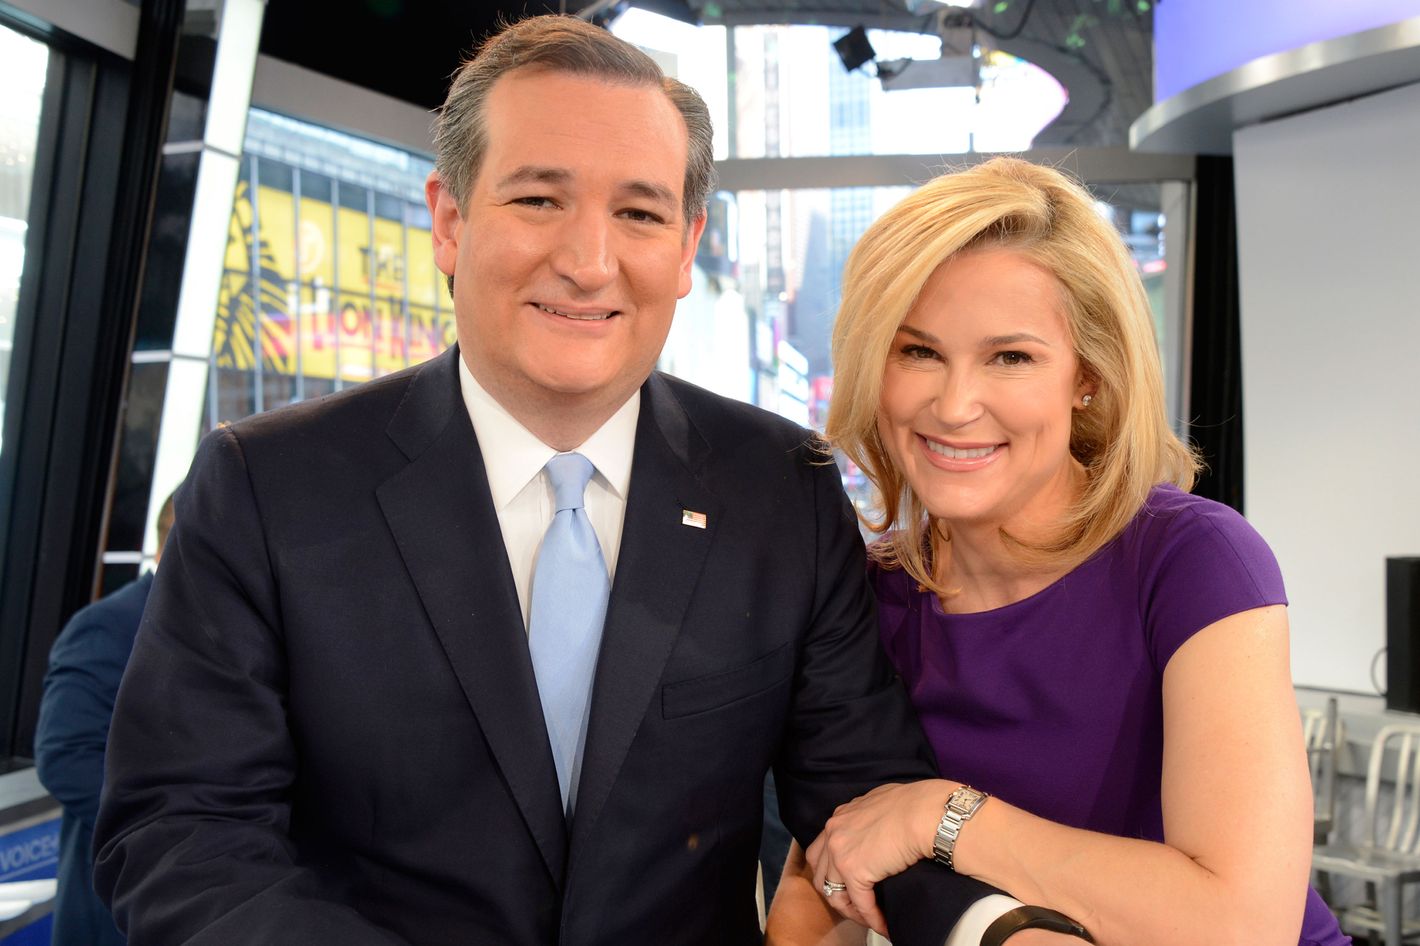 Cop thought Ted Cruz's wife Heidi was a 'danger to herself' 10